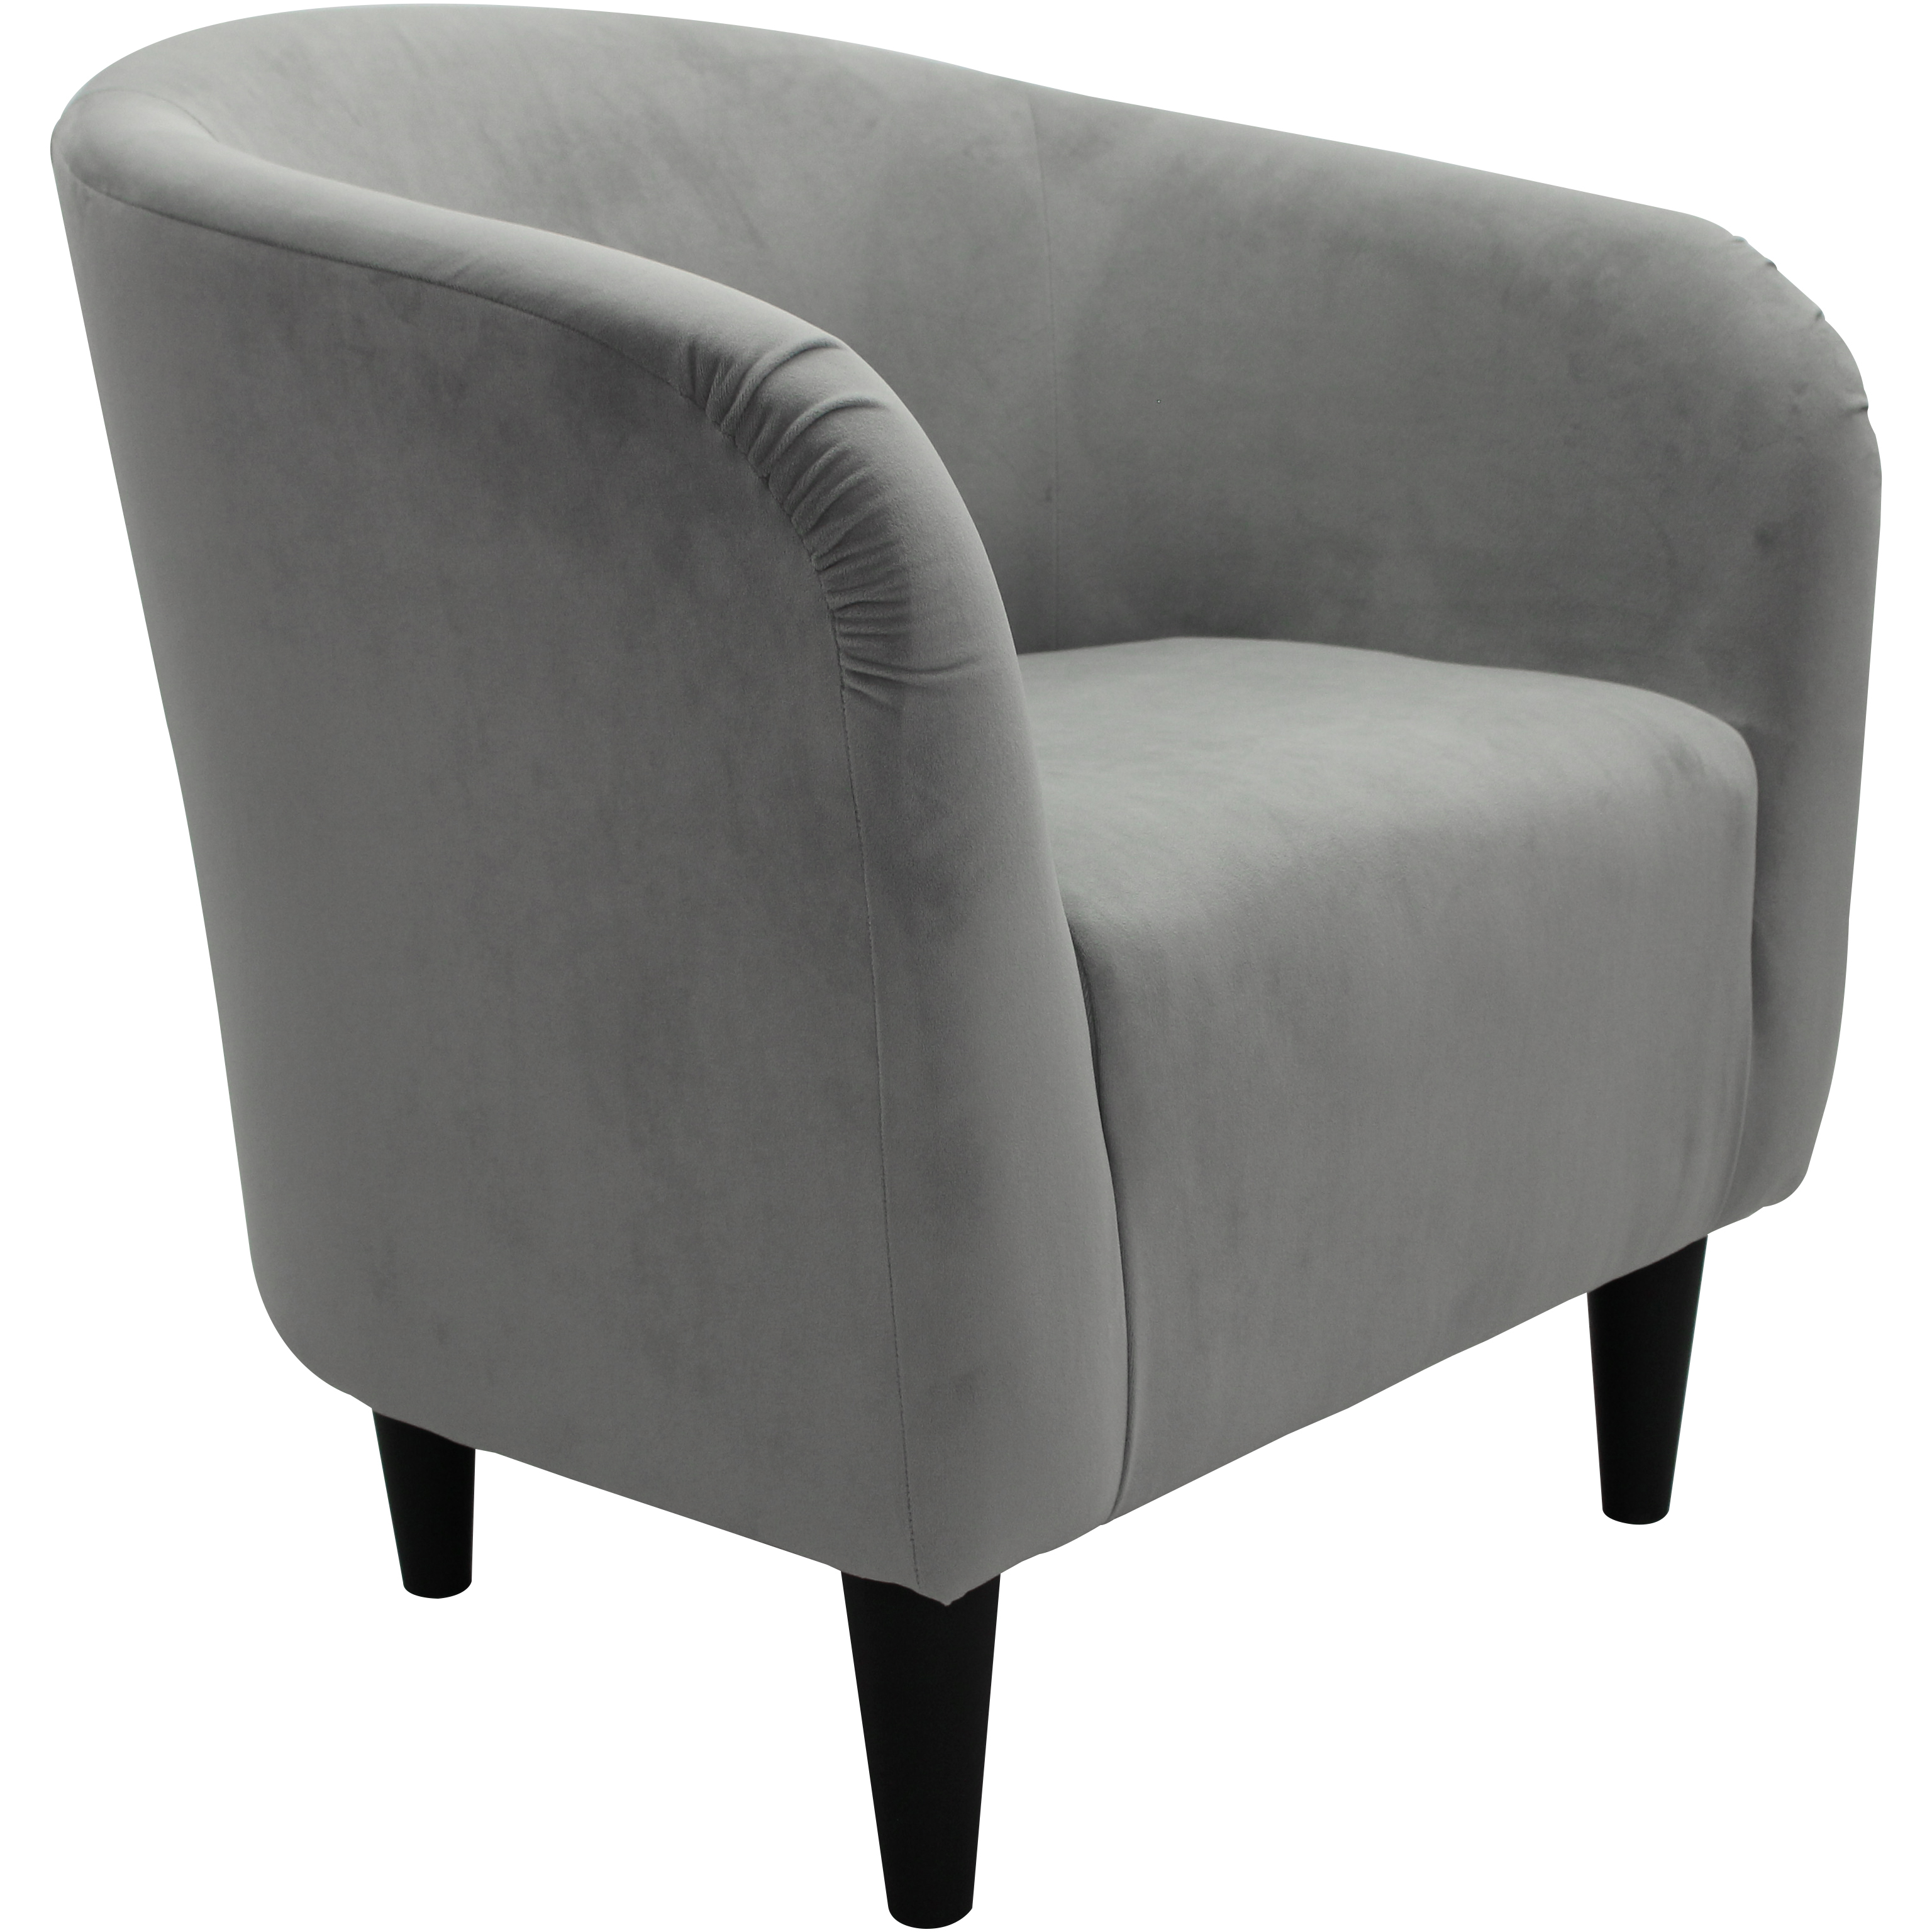 Mainstays Microfiber Tub Accent Chair, Dove Gray - image 3 of 8